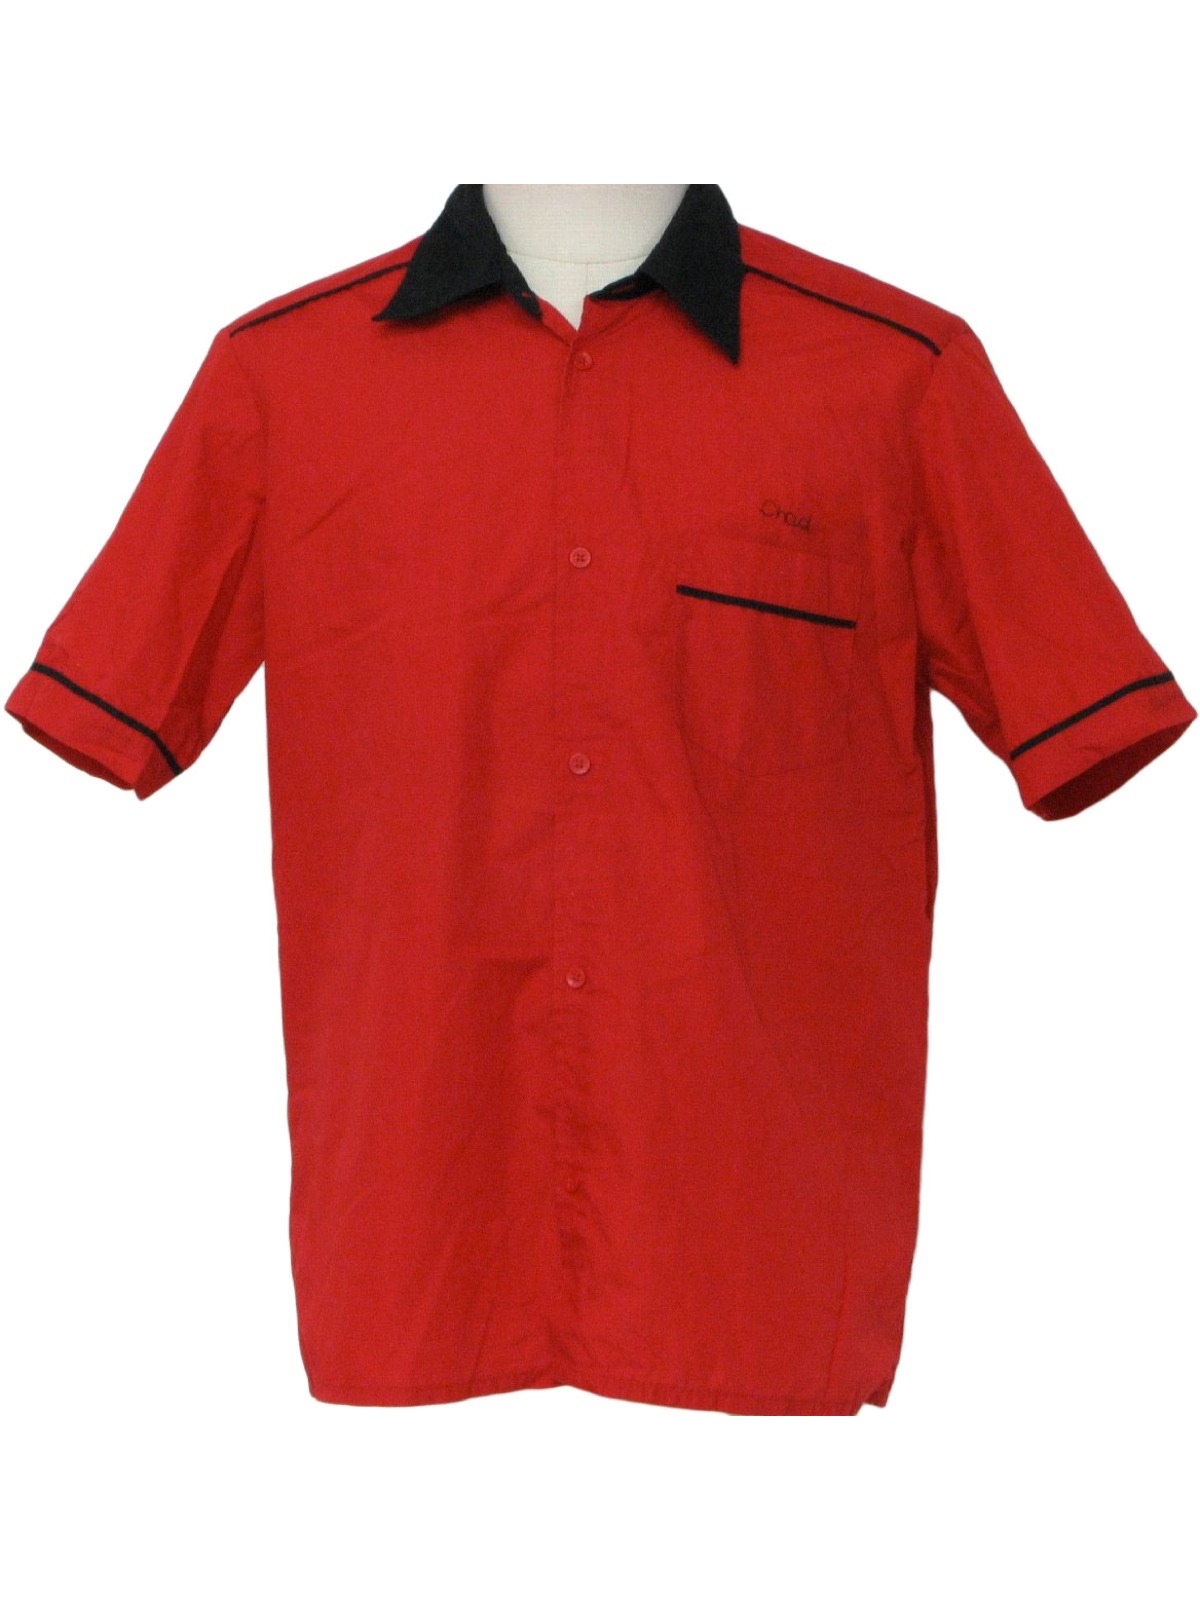 Retro Eighties Bowling Shirt: 80s -Missing Label- Mens red background ...